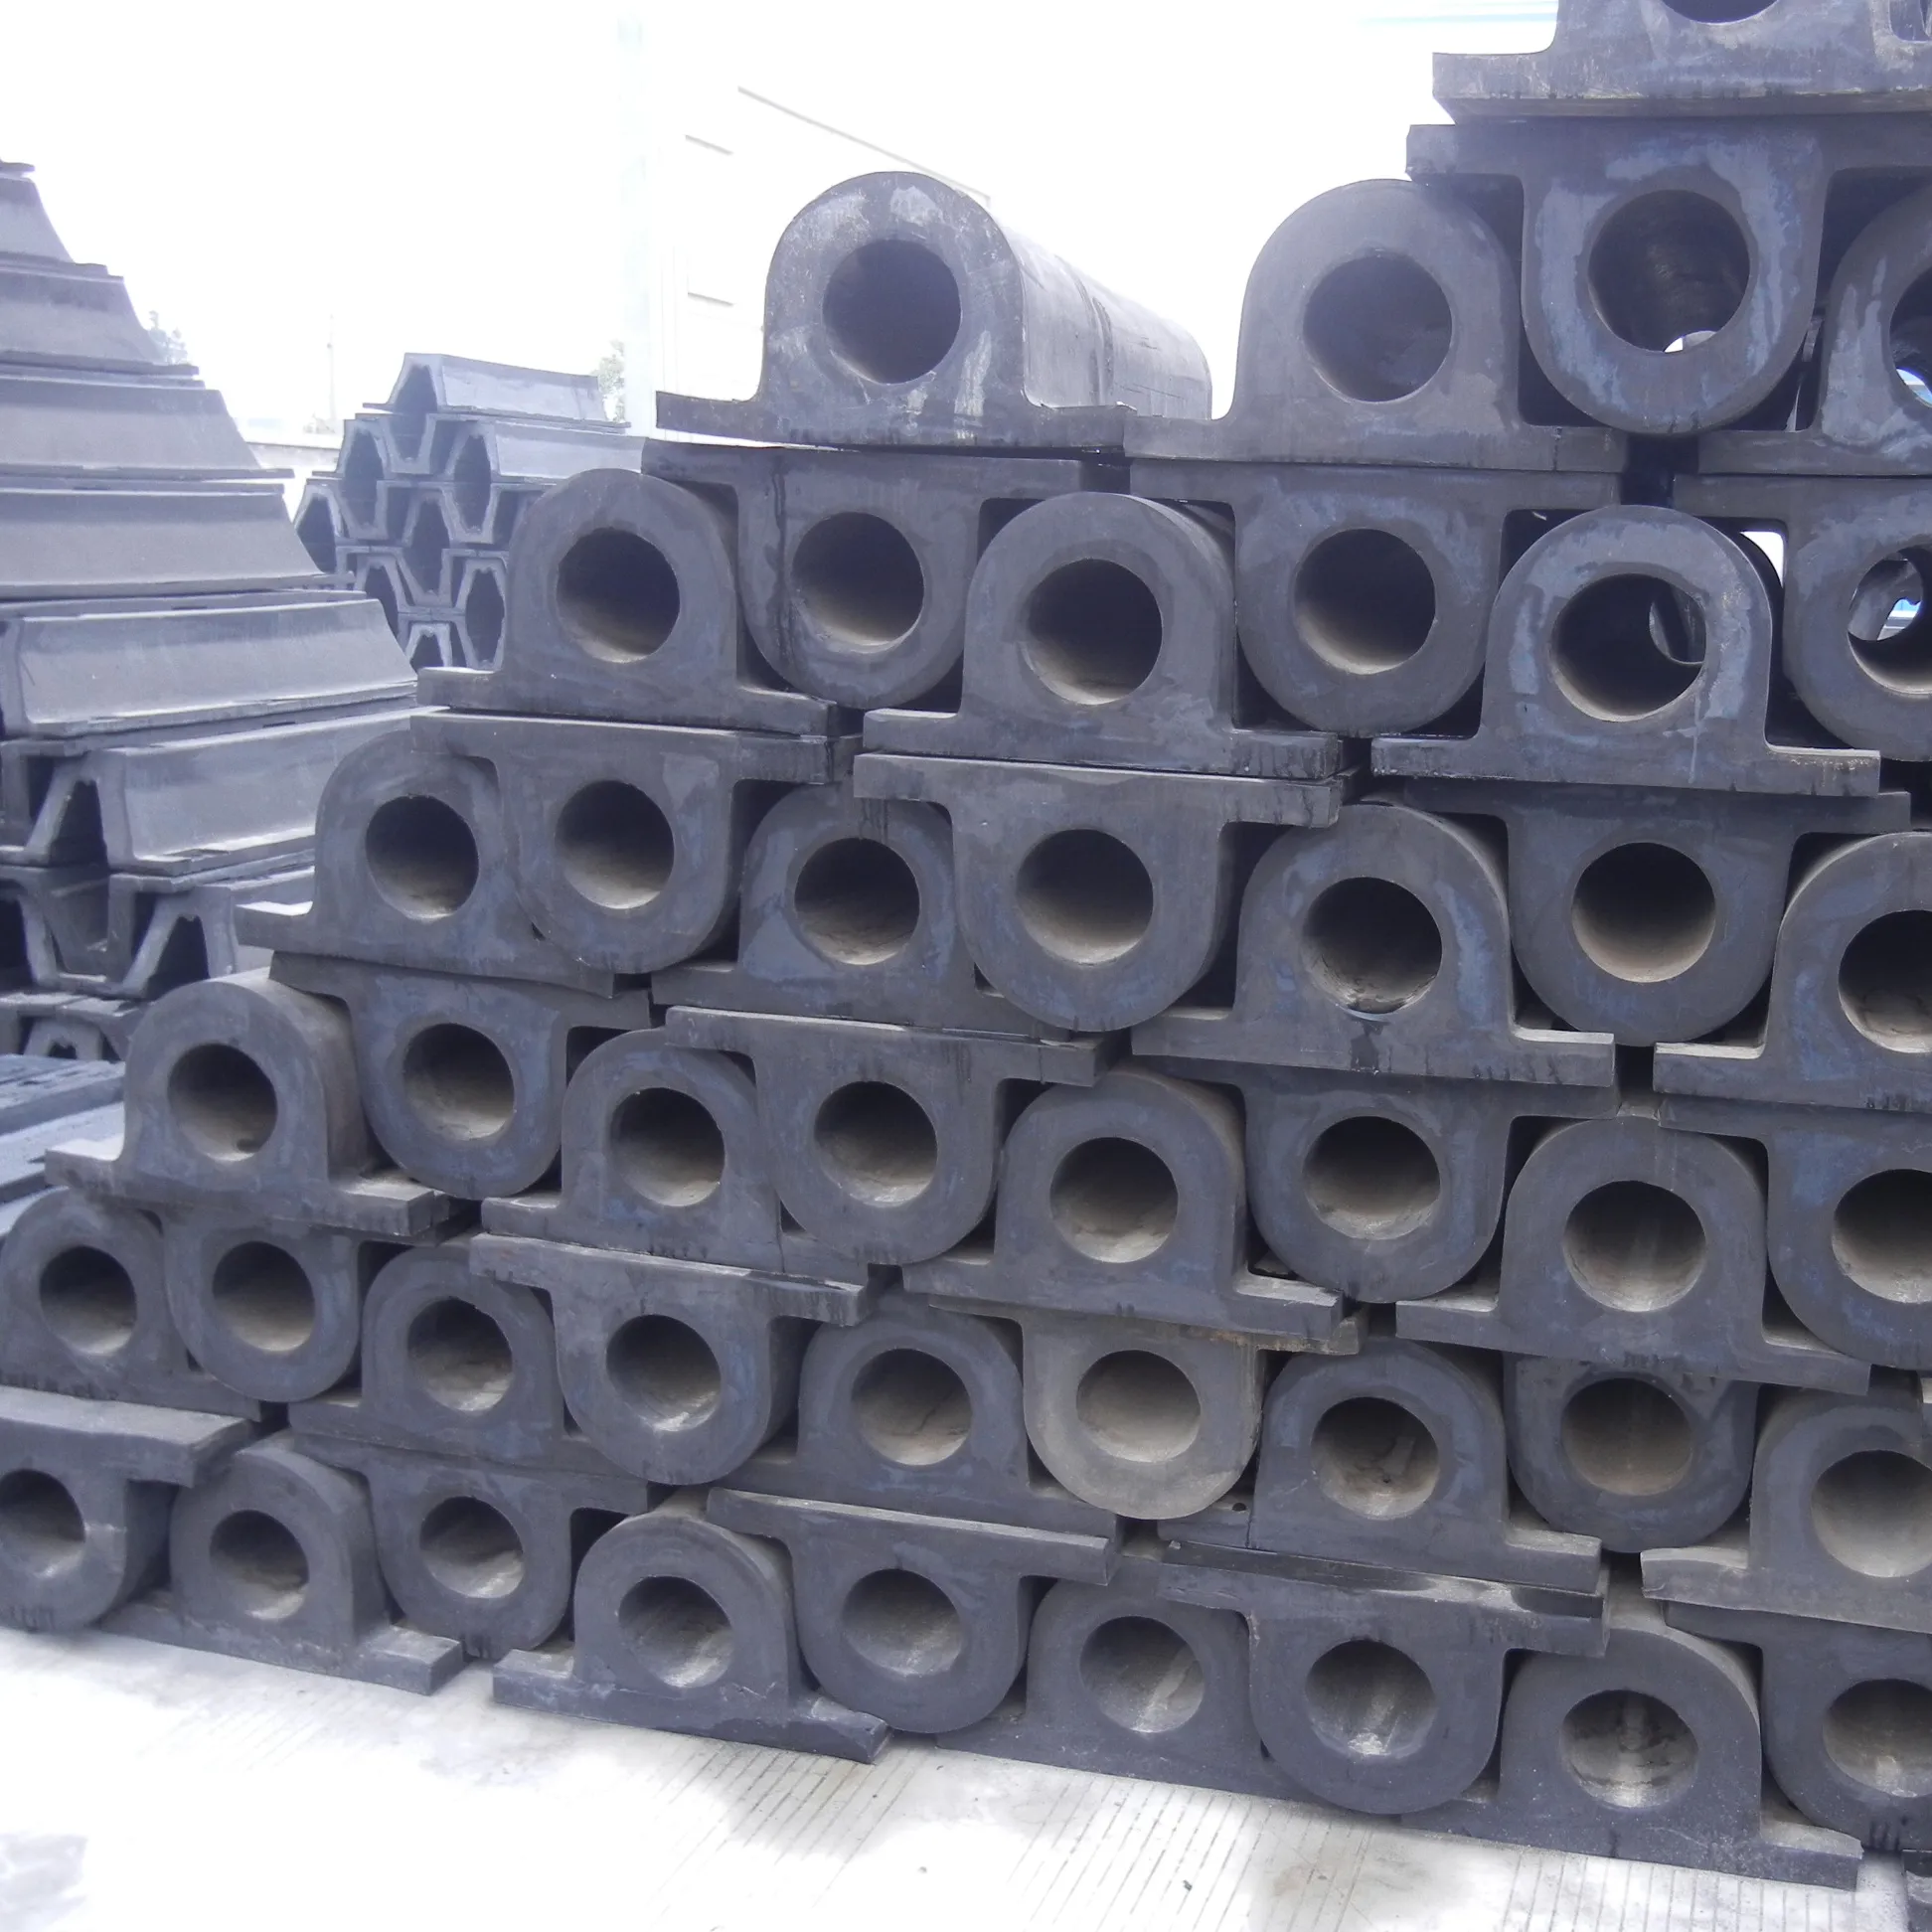 China factory direct gd shape natural rubber good performance marine rubber fender gd type rubber fenders